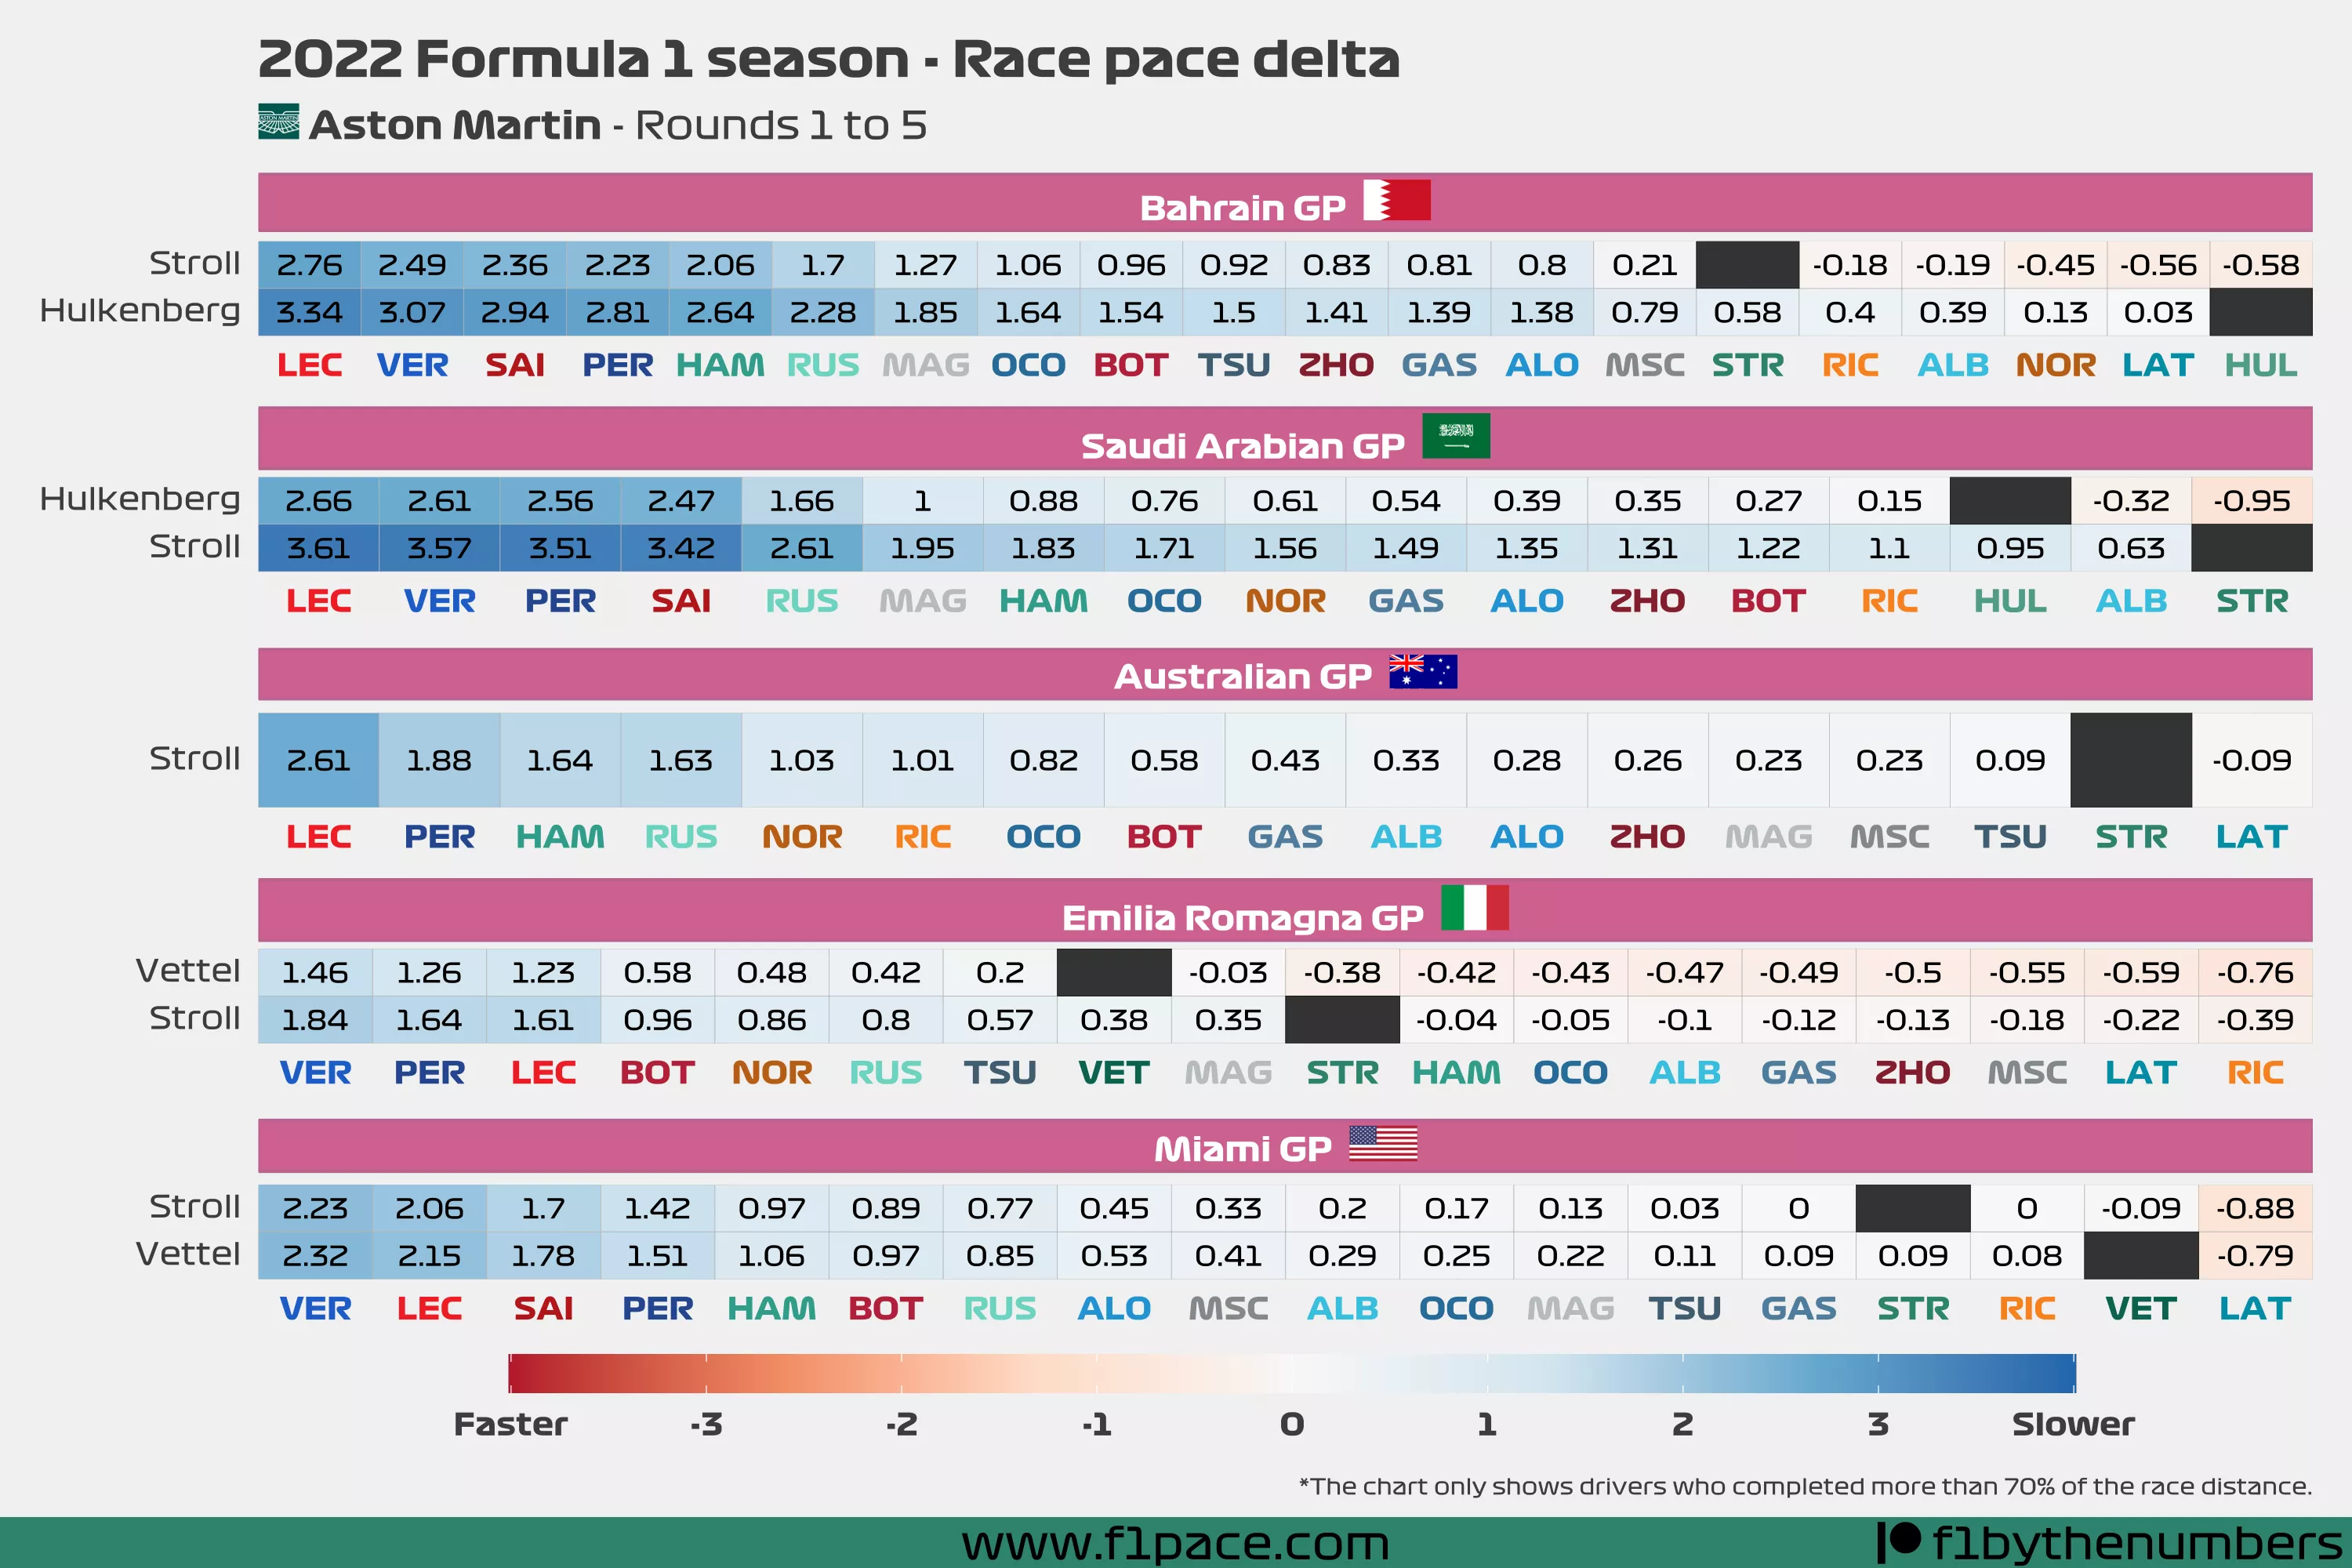 Race pace delta: Rounds to 1 to 5 - Aston Martin